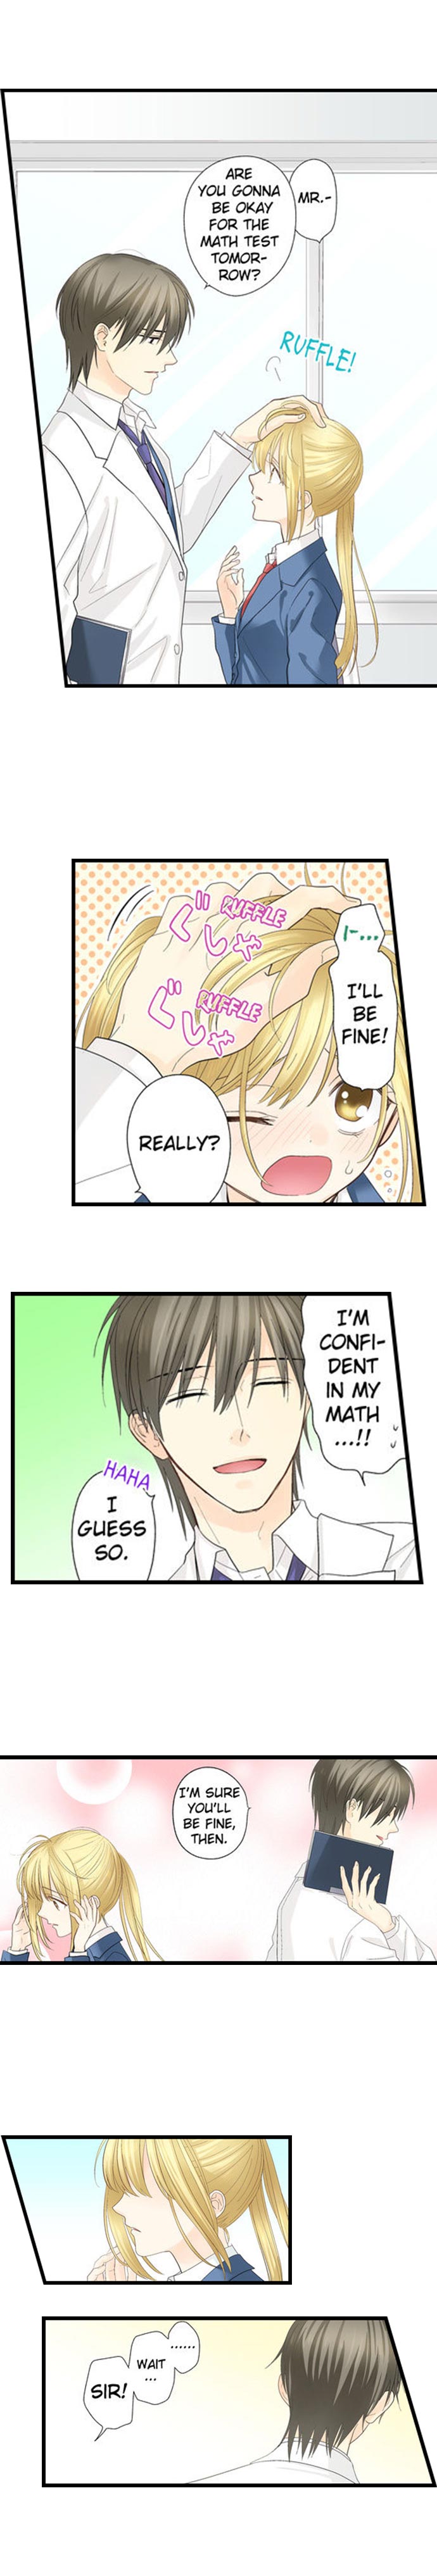 Running a Love Hotel with My Math Teacher - Chapter 6 Page 9